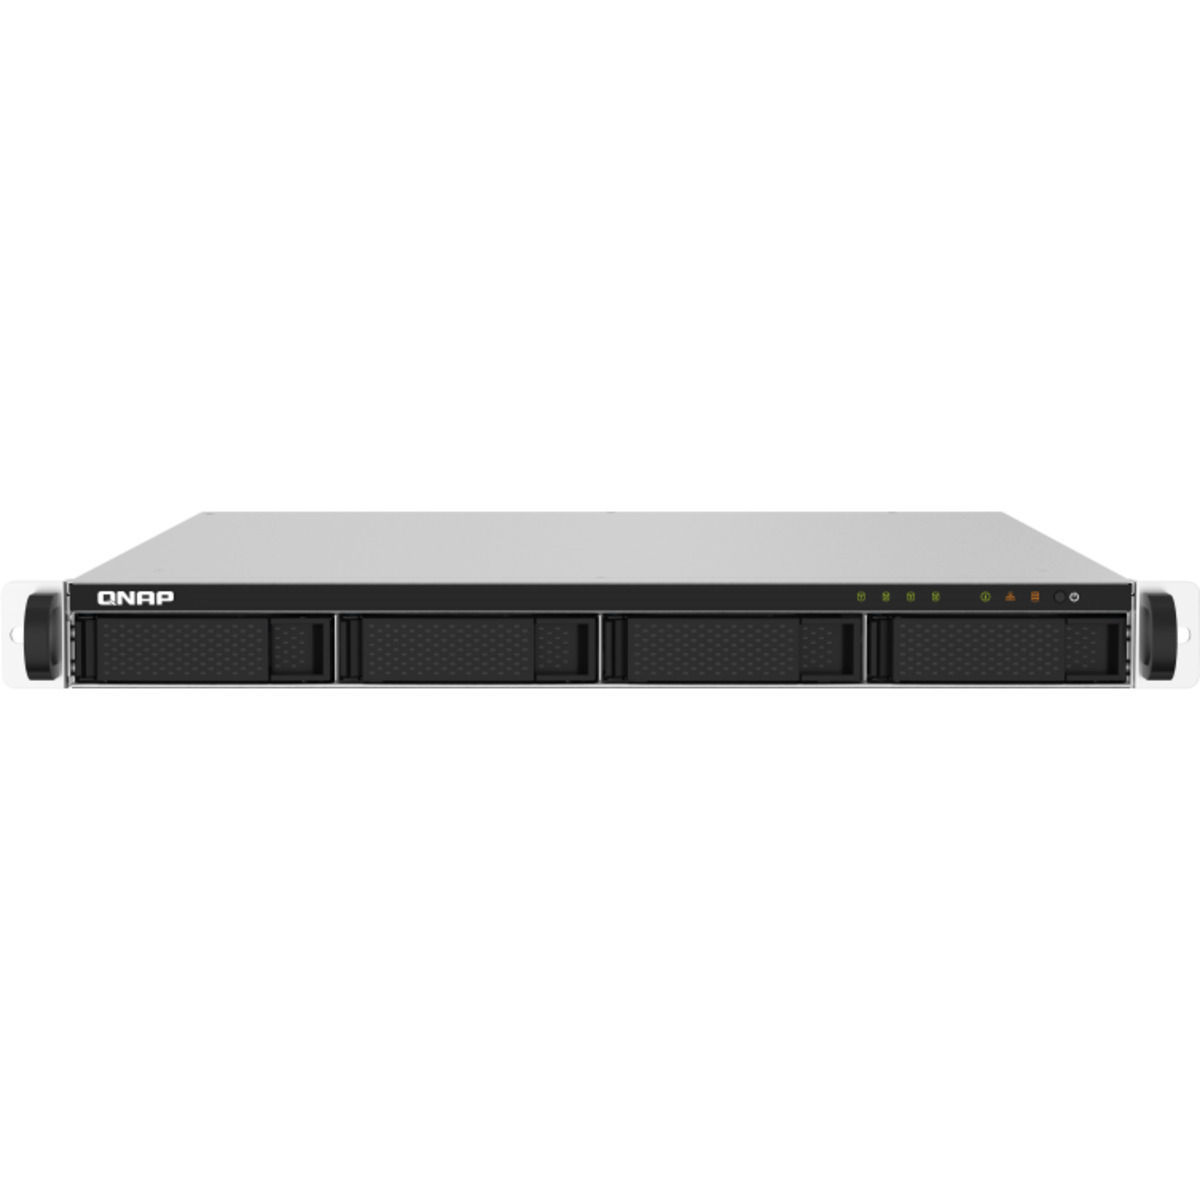 buy $1384 QNAP TS-432PXU-RP 8tb RackMount NAS - Network Attached Storage Device 4x2000gb Seagate BarraCuda ST2000DM008 3.5 7200rpm SATA 6Gb/s HDD CONSUMER Class Drives Installed - Burn-In Tested - ON SALE - FREE RAM UPGRADE - nas headquarters buy network attached storage server device das new raid-5 free shipping usa christmas new year holiday sale TS-432PXU-RP